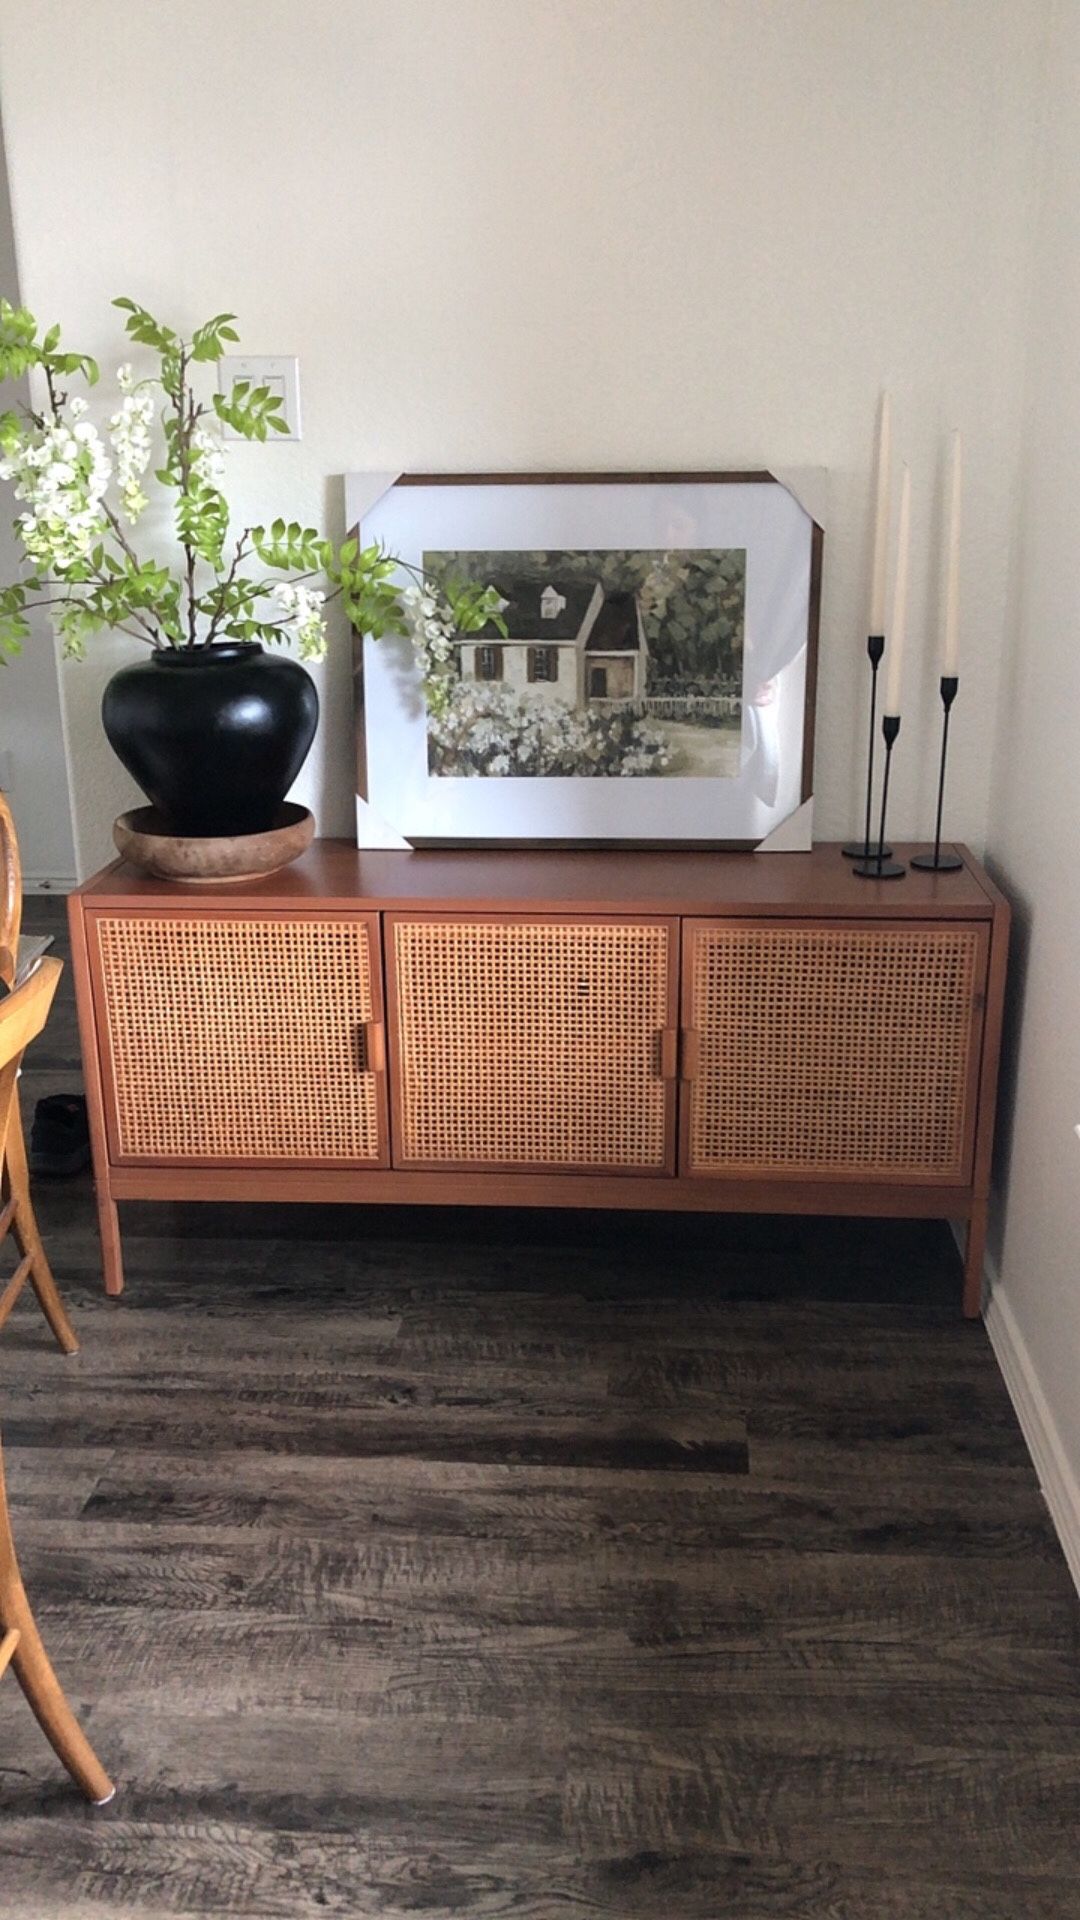 Sideboard/tv Stand 